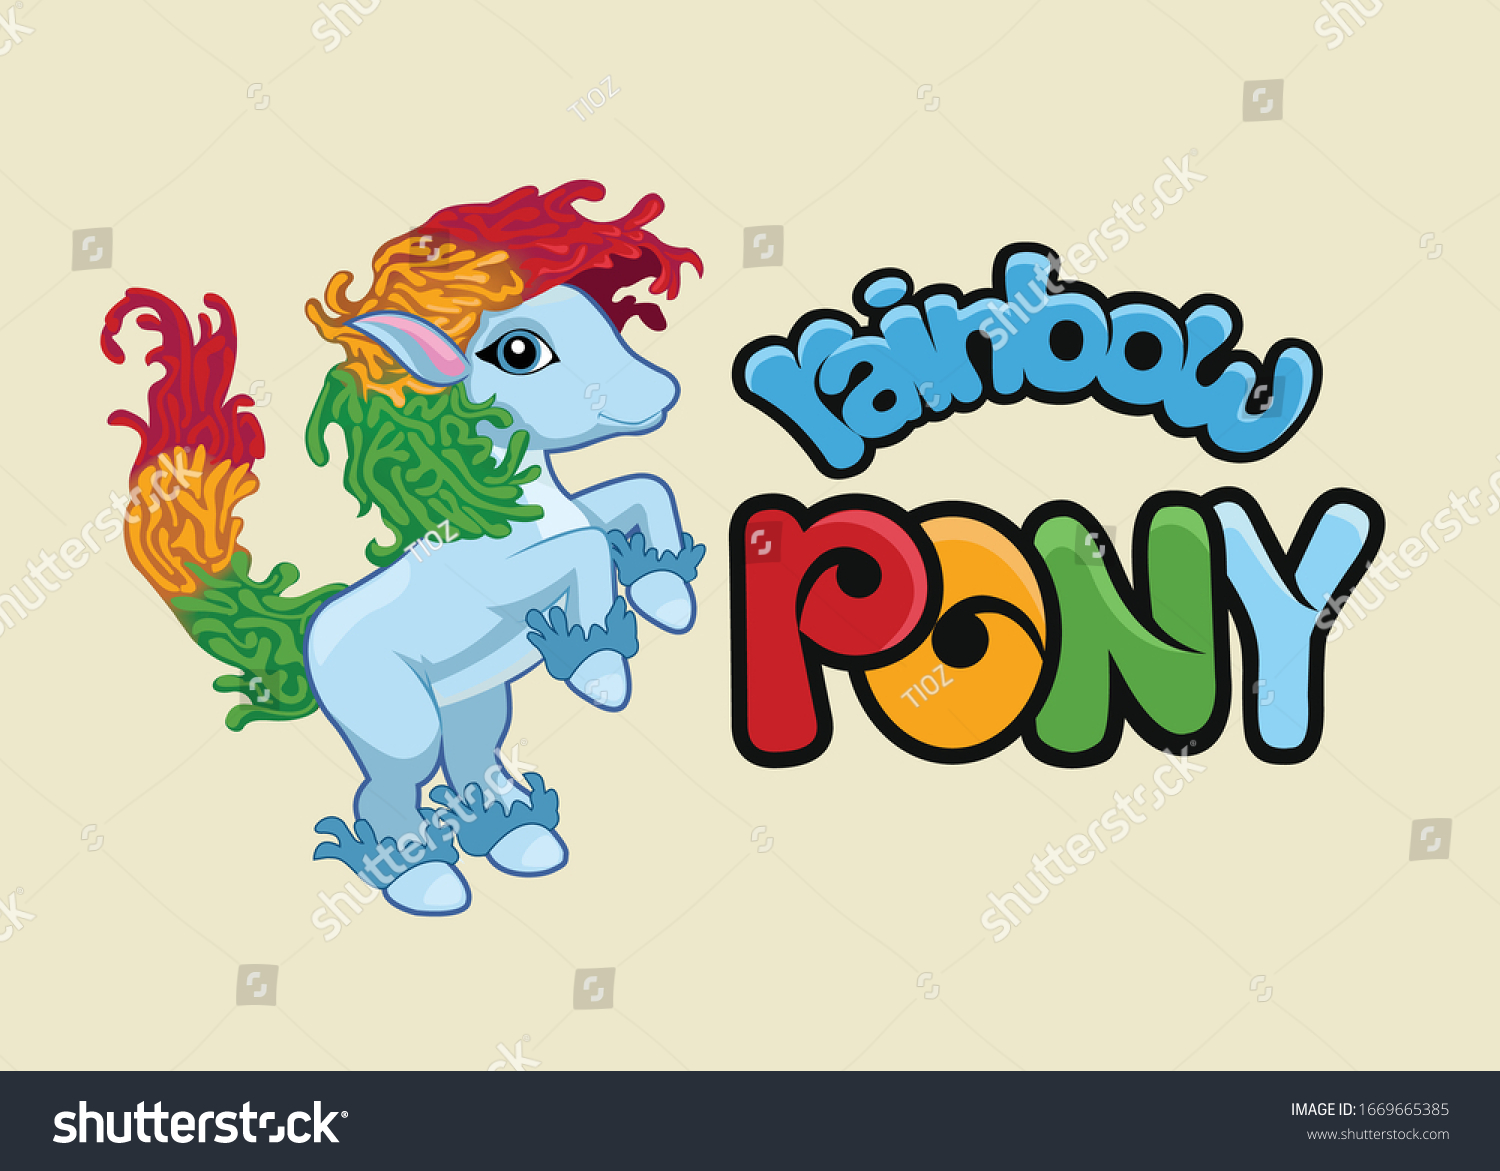 SVG of rainbow pony vector illustration for mascot, model for toy or doll company svg